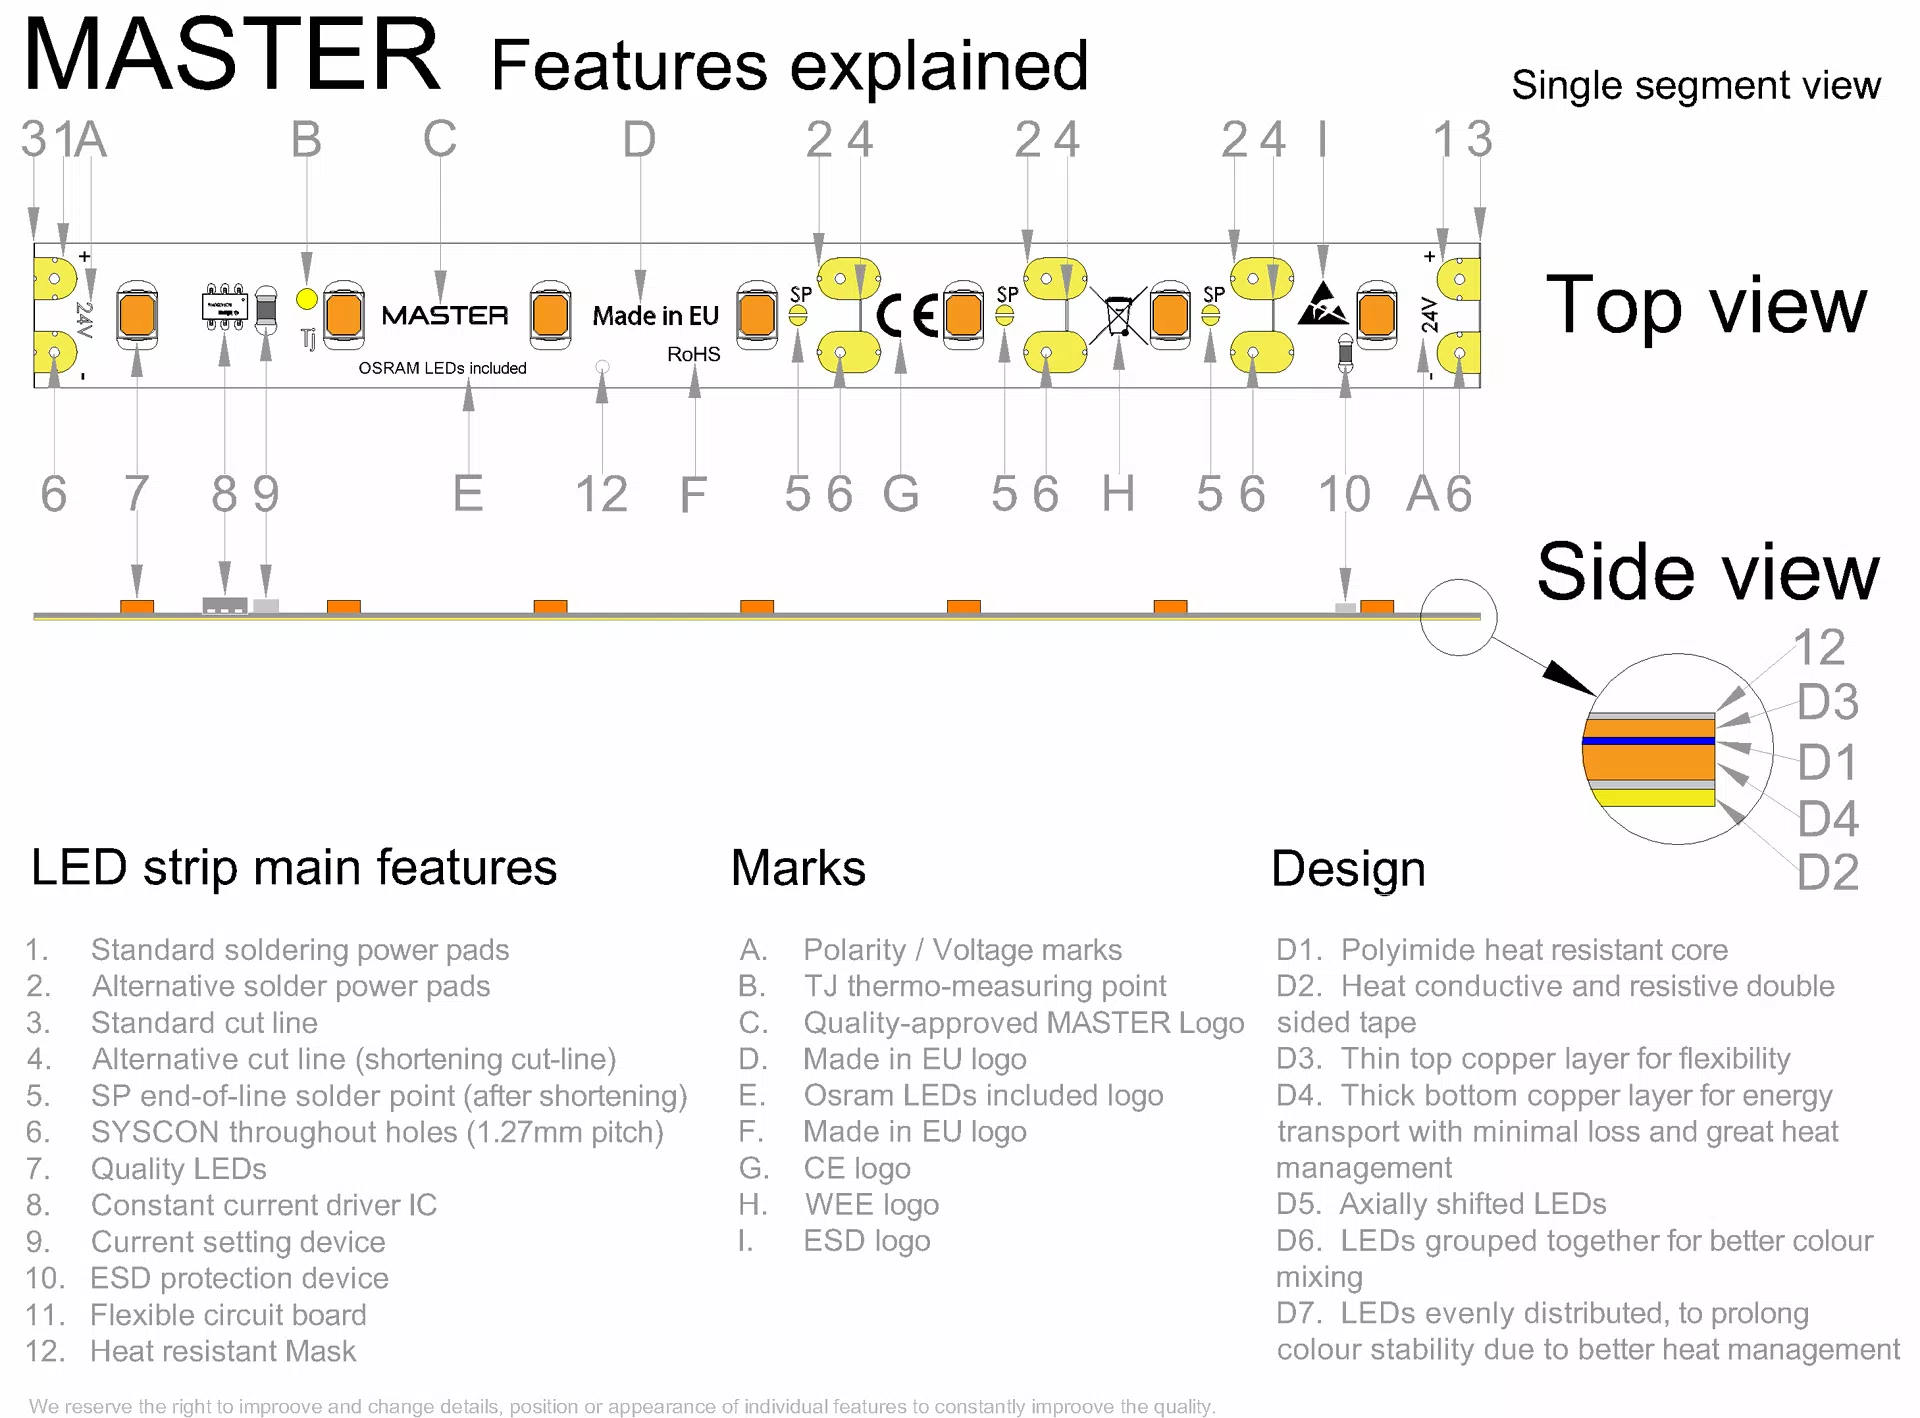 MASTER POWER LED strip segment drawing with all features explained